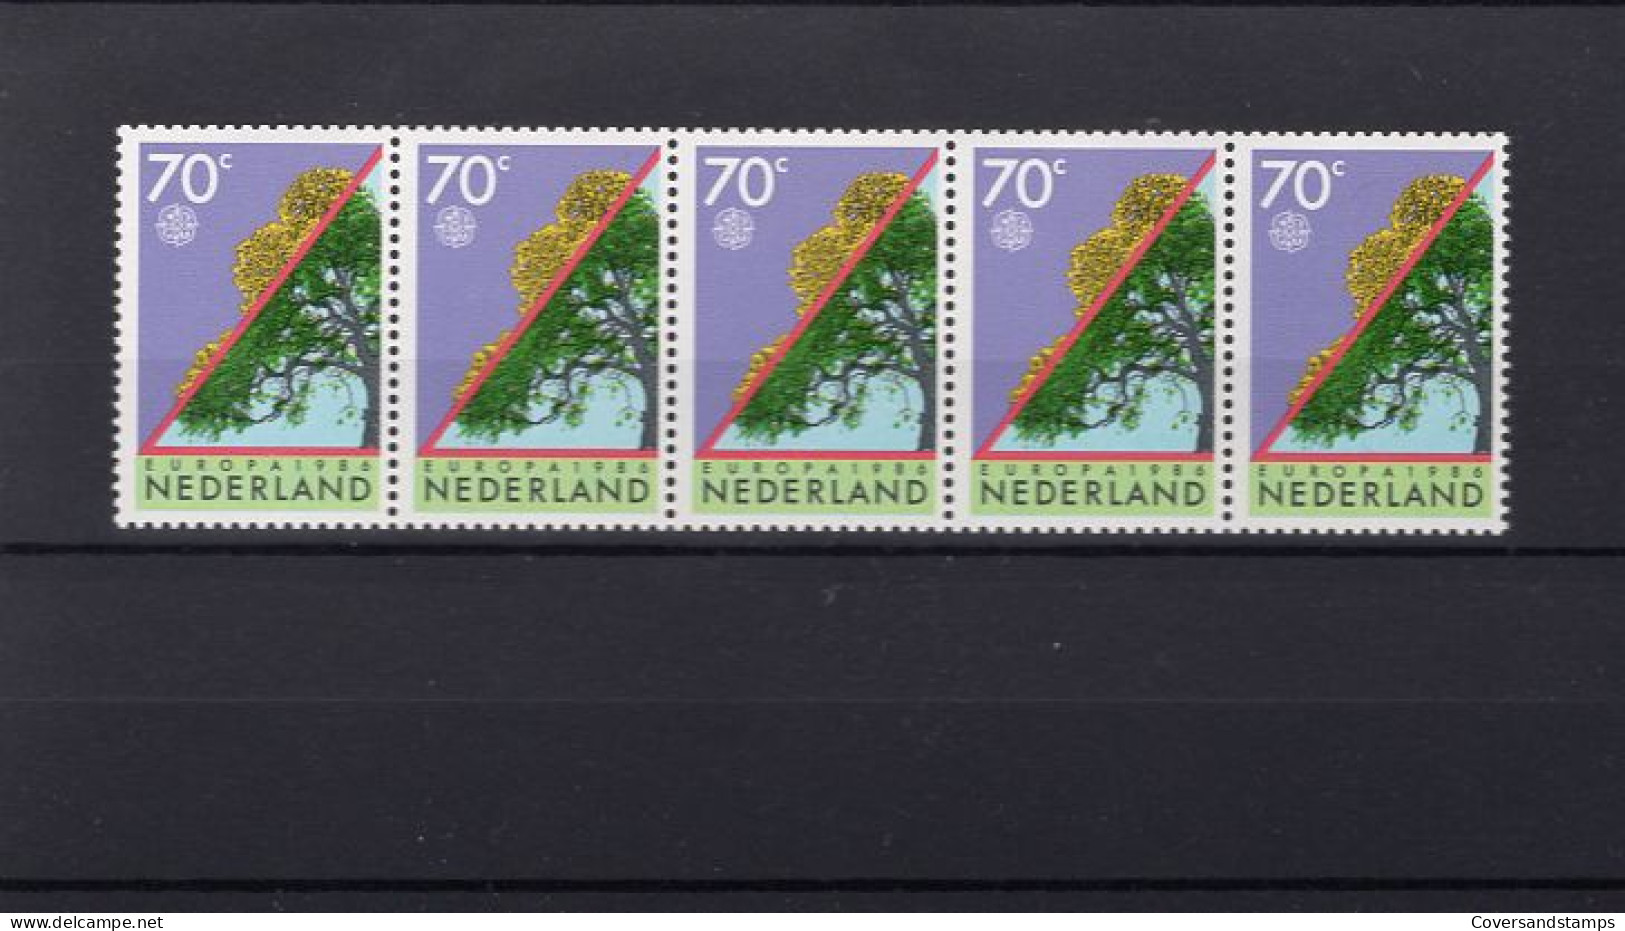  Netherlands - NVPH 1354 In Strips Of 5, Number 00170  ** MNH - 1986